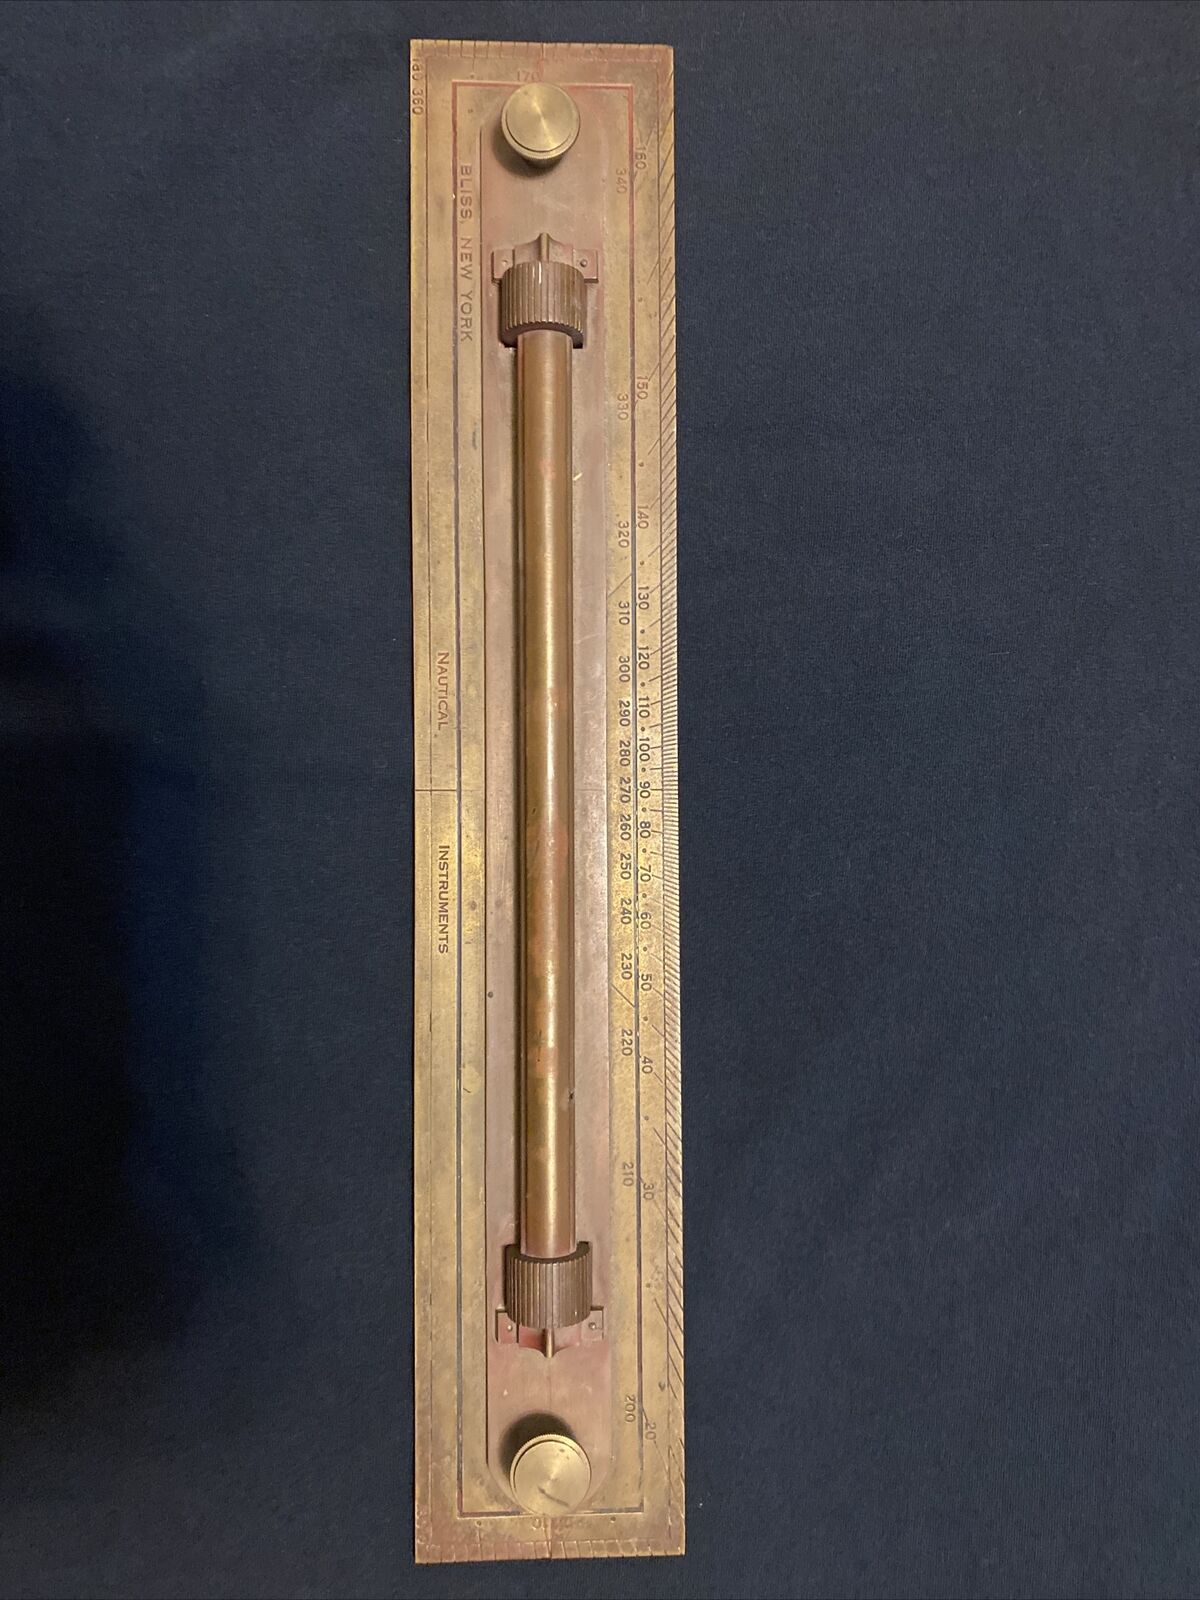 Antique Extremely Rare 19th Century Rolling Parallel Rule By John Bliss New York